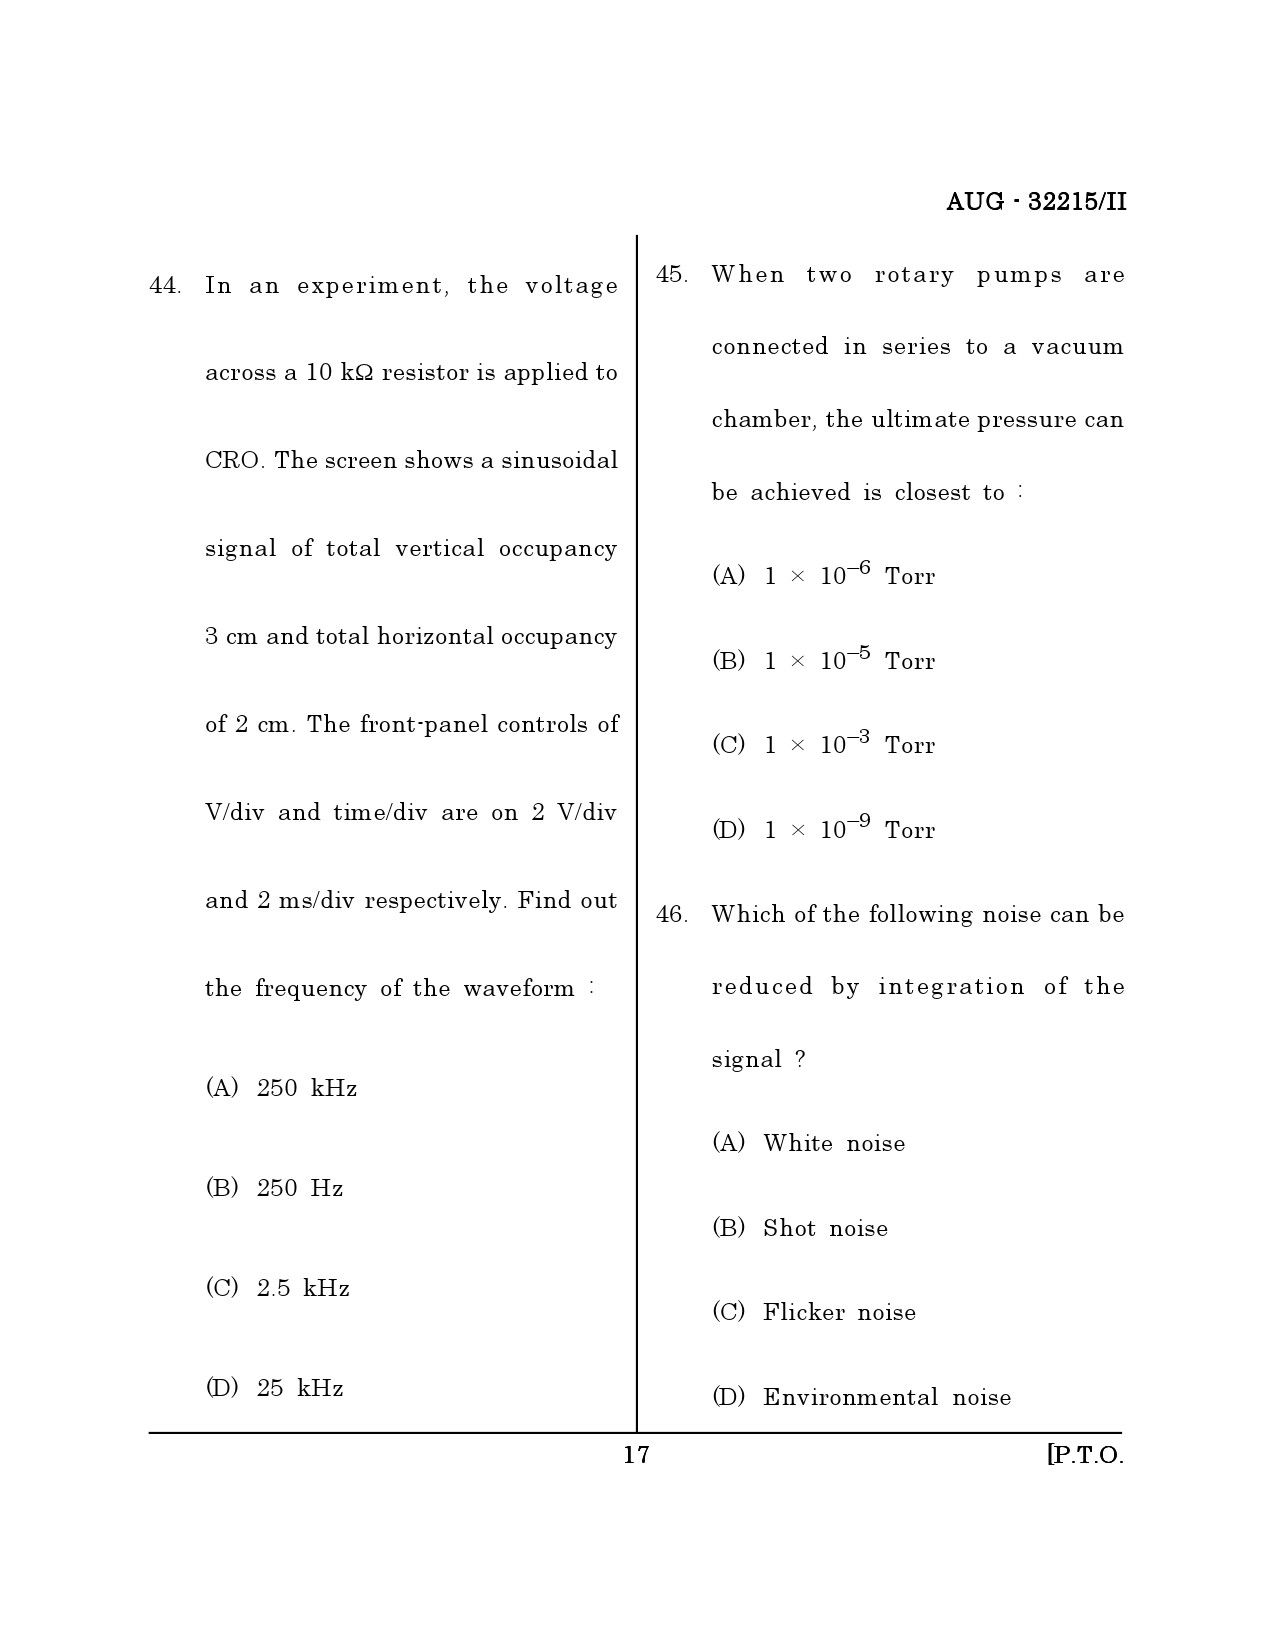 Maharashtra SET Physical Science Question Paper II August 2015 16